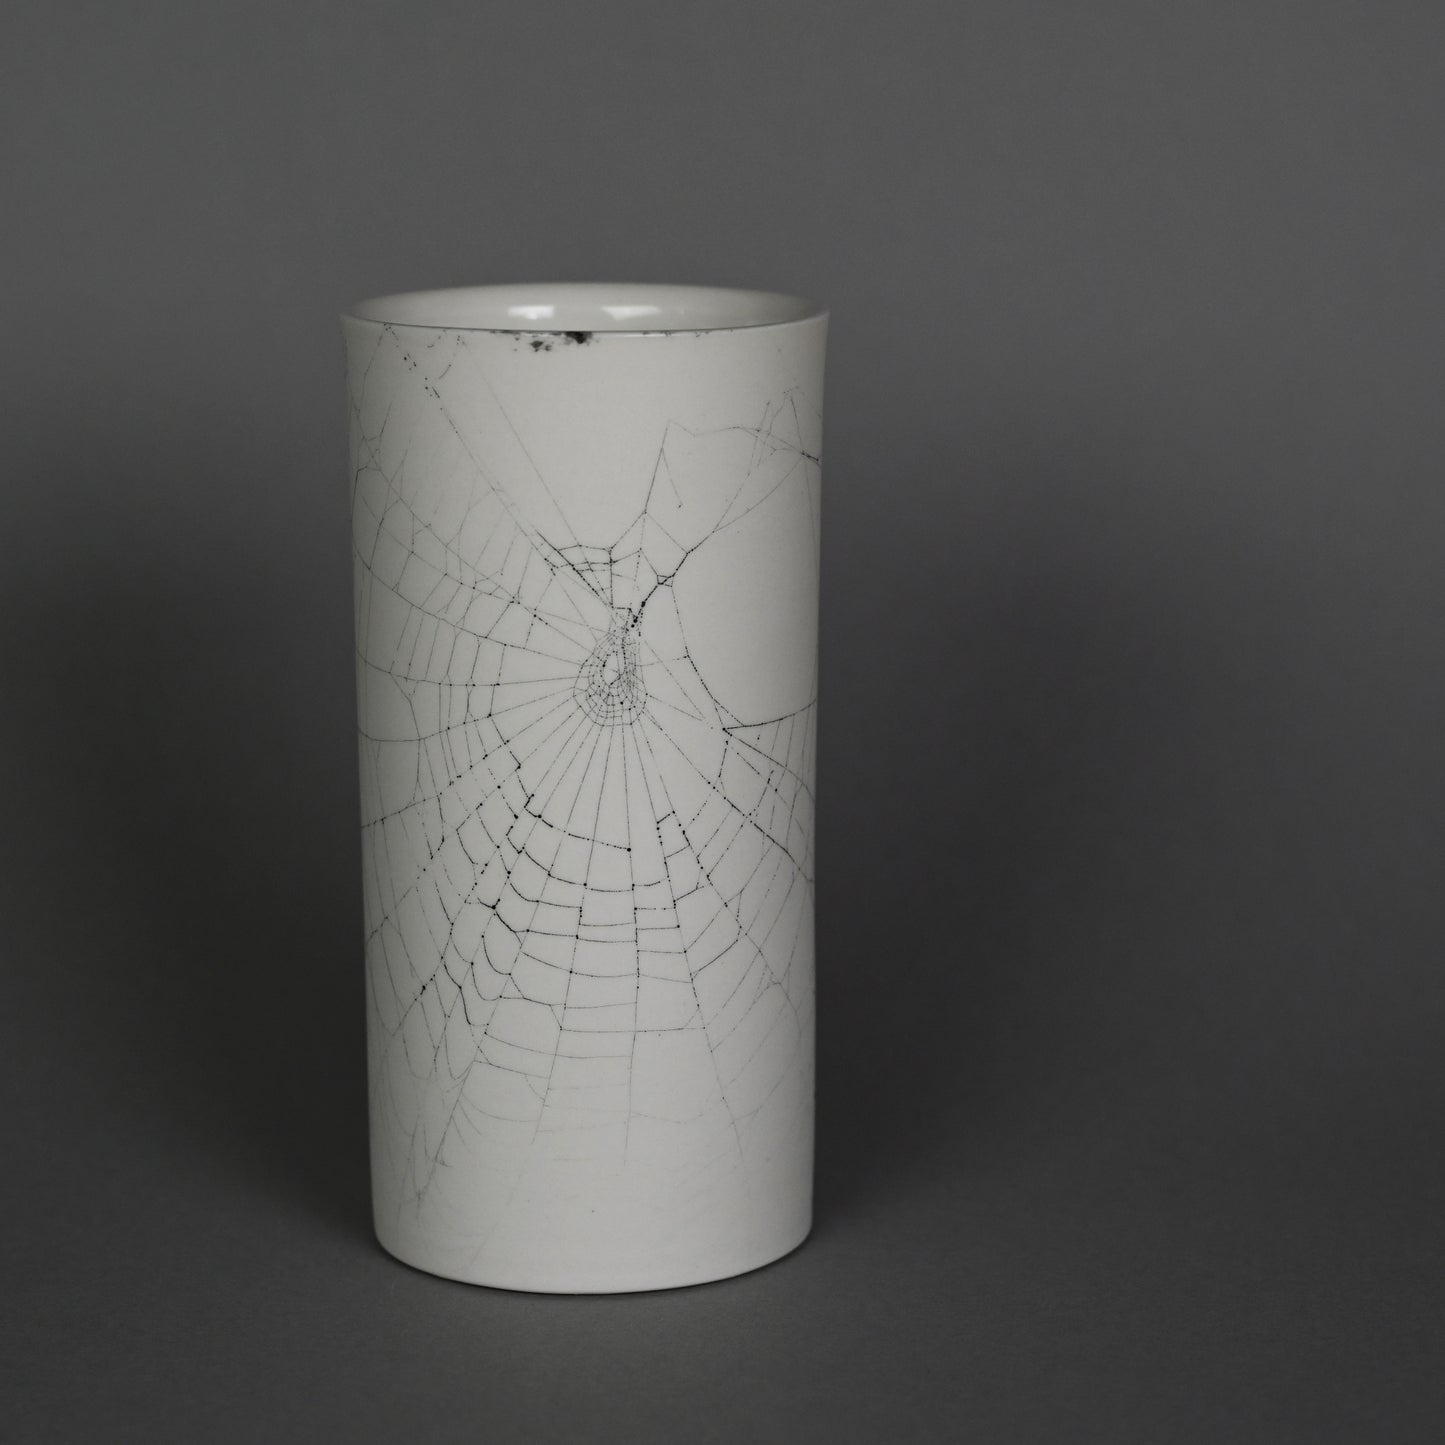 Web on Clay (191), Collected September 19, 2022